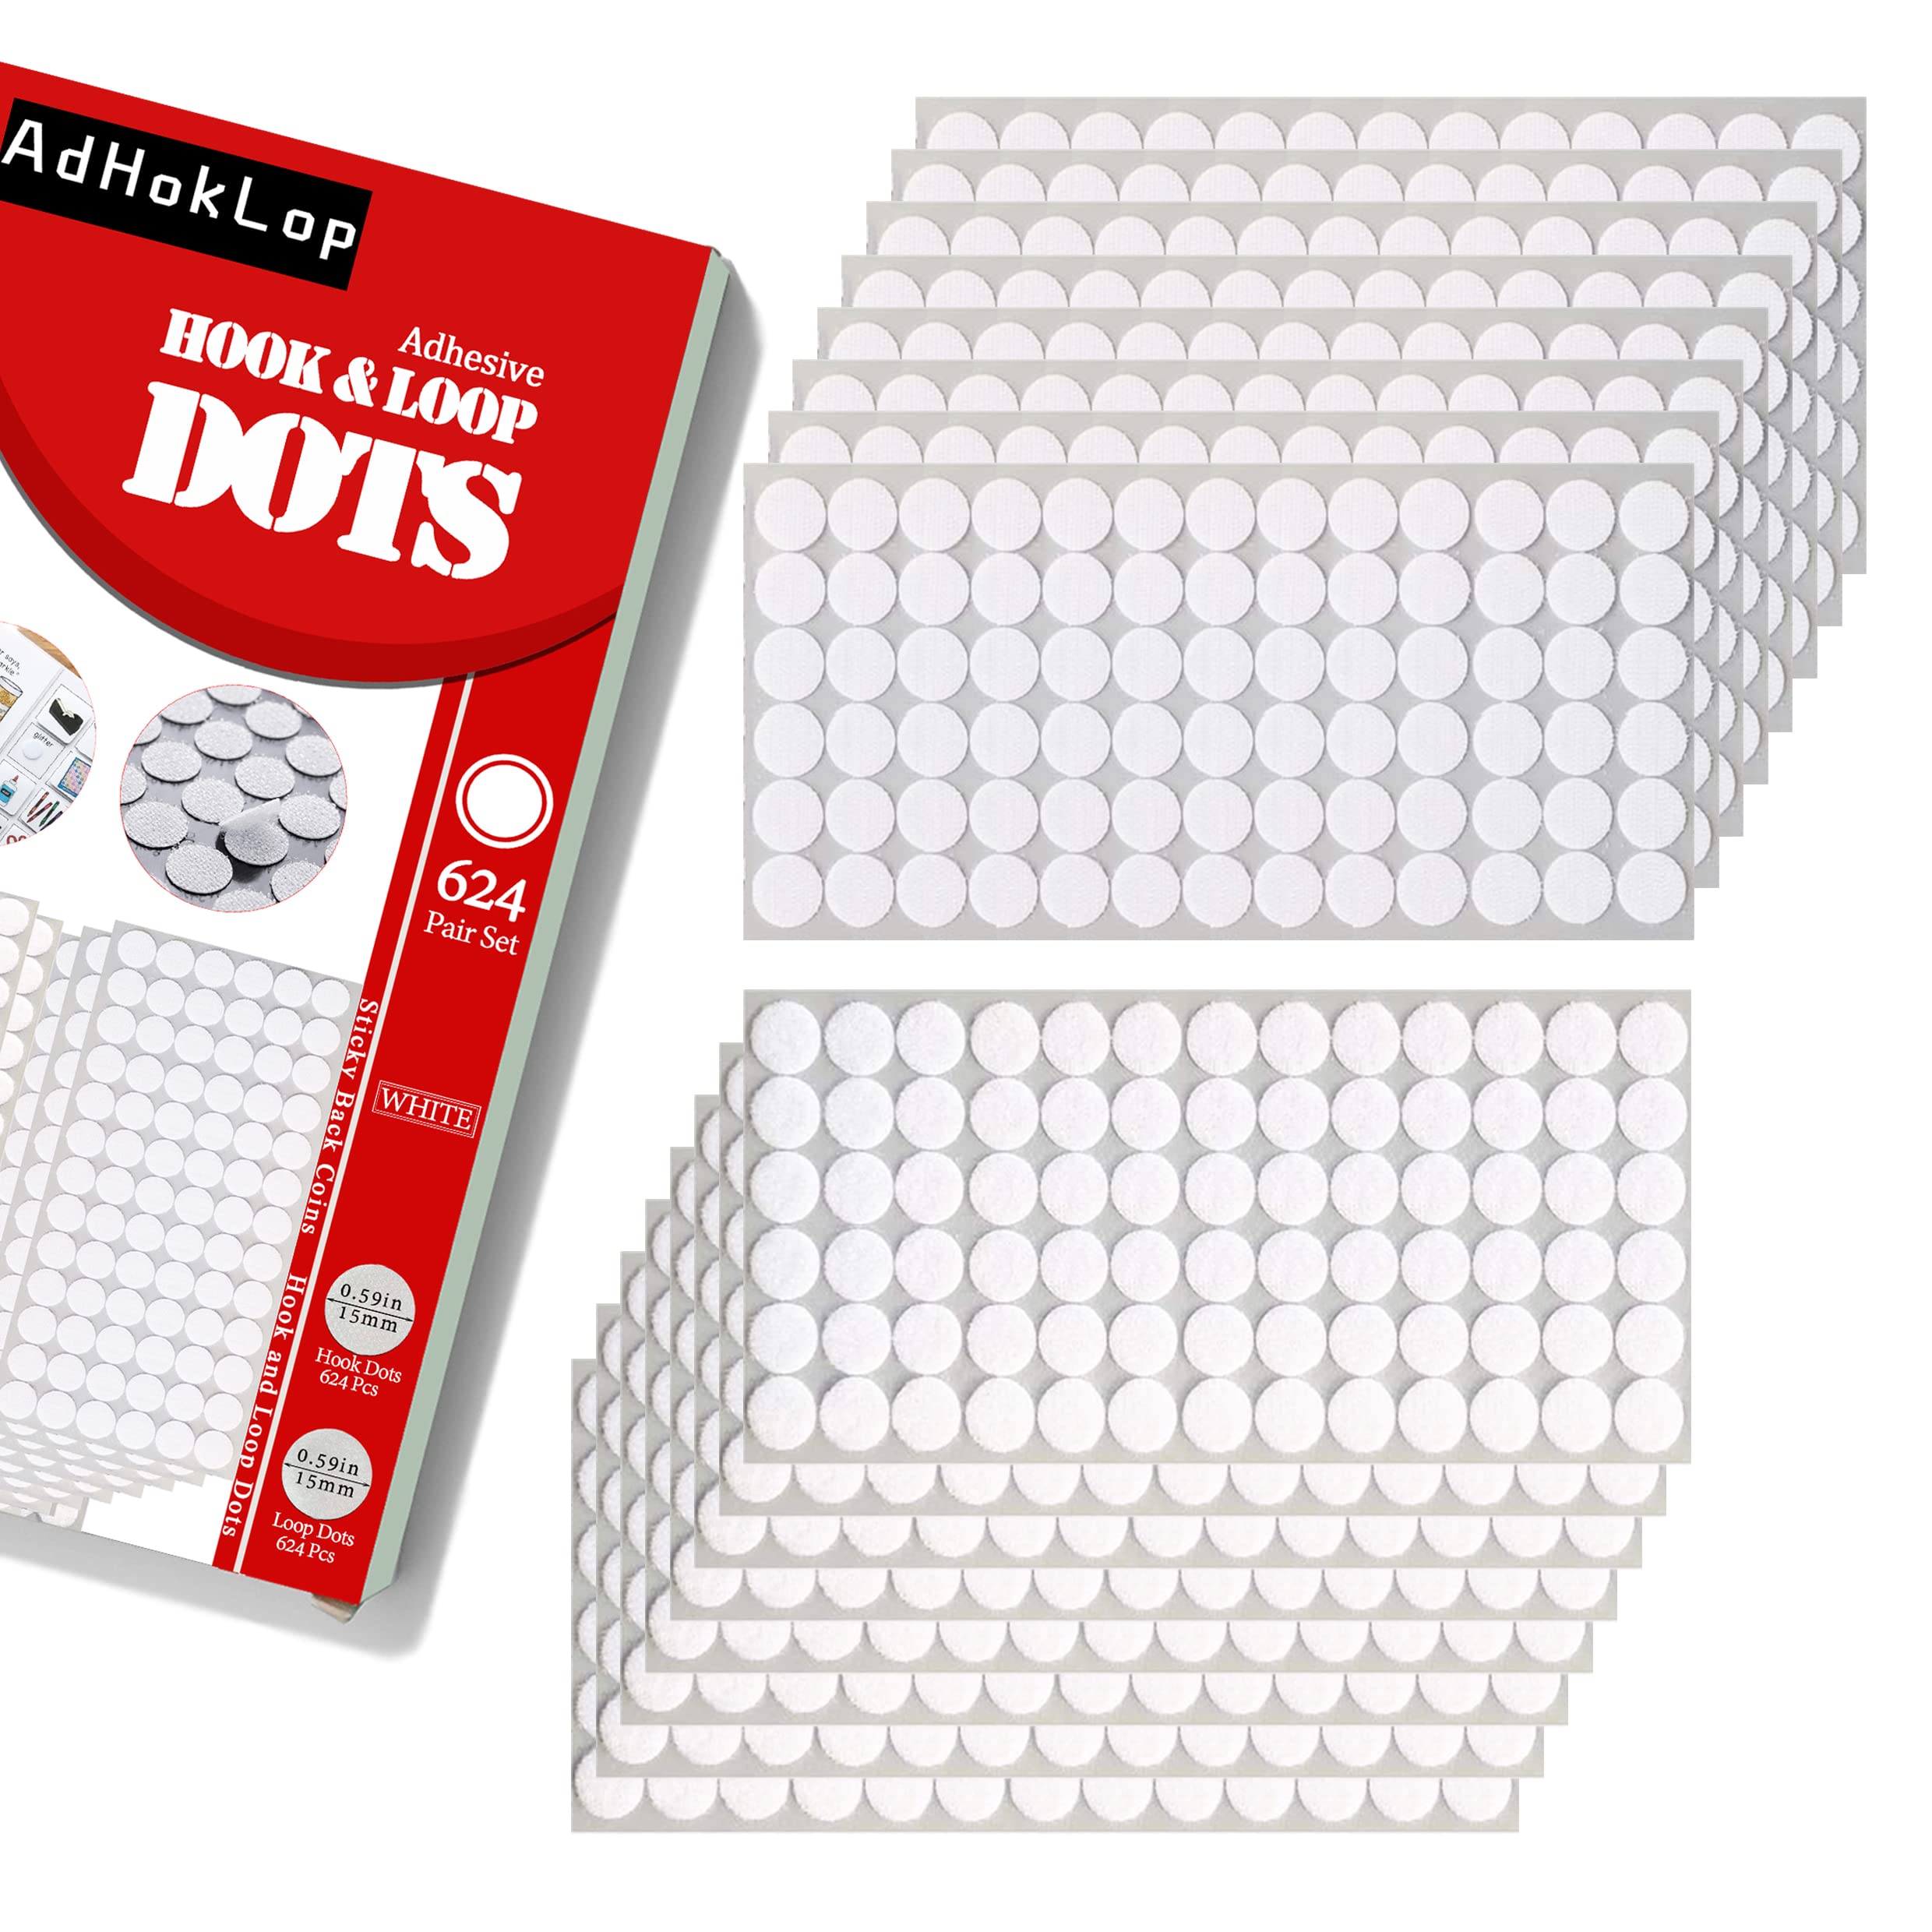 Adhoklop 1248 Pcs (624 Pairs) Dots with Adhesive 0.59 Inch Diameter Hook  and Loop Nylon Sticky Back Coins Adhesive Strips Fastener Round Tapes for  School Classroom Teacher Supplies (White)